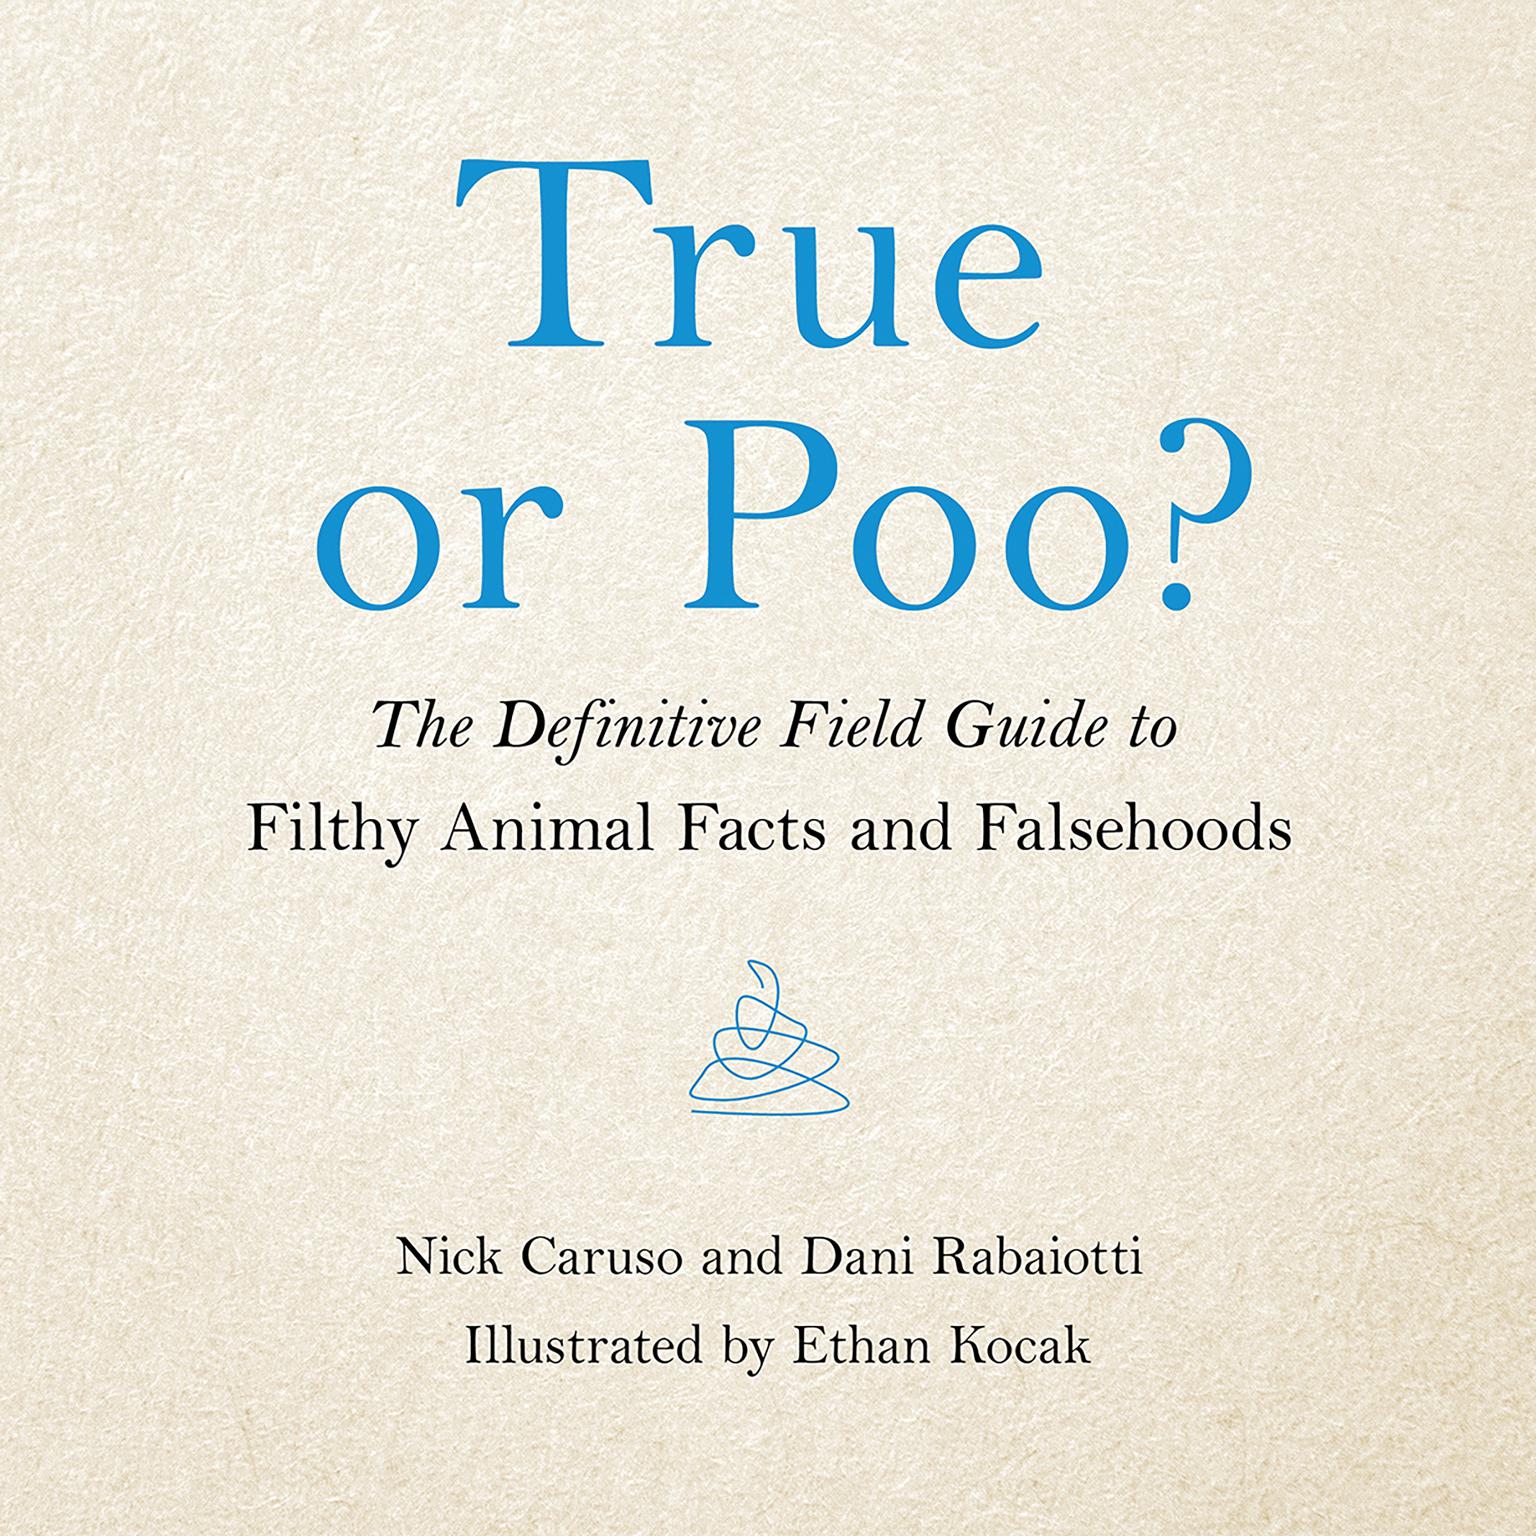 True or Poo?: The Definitive Field Guide to Filthy Animal Facts and Falsehoods Audiobook, by Nick Caruso